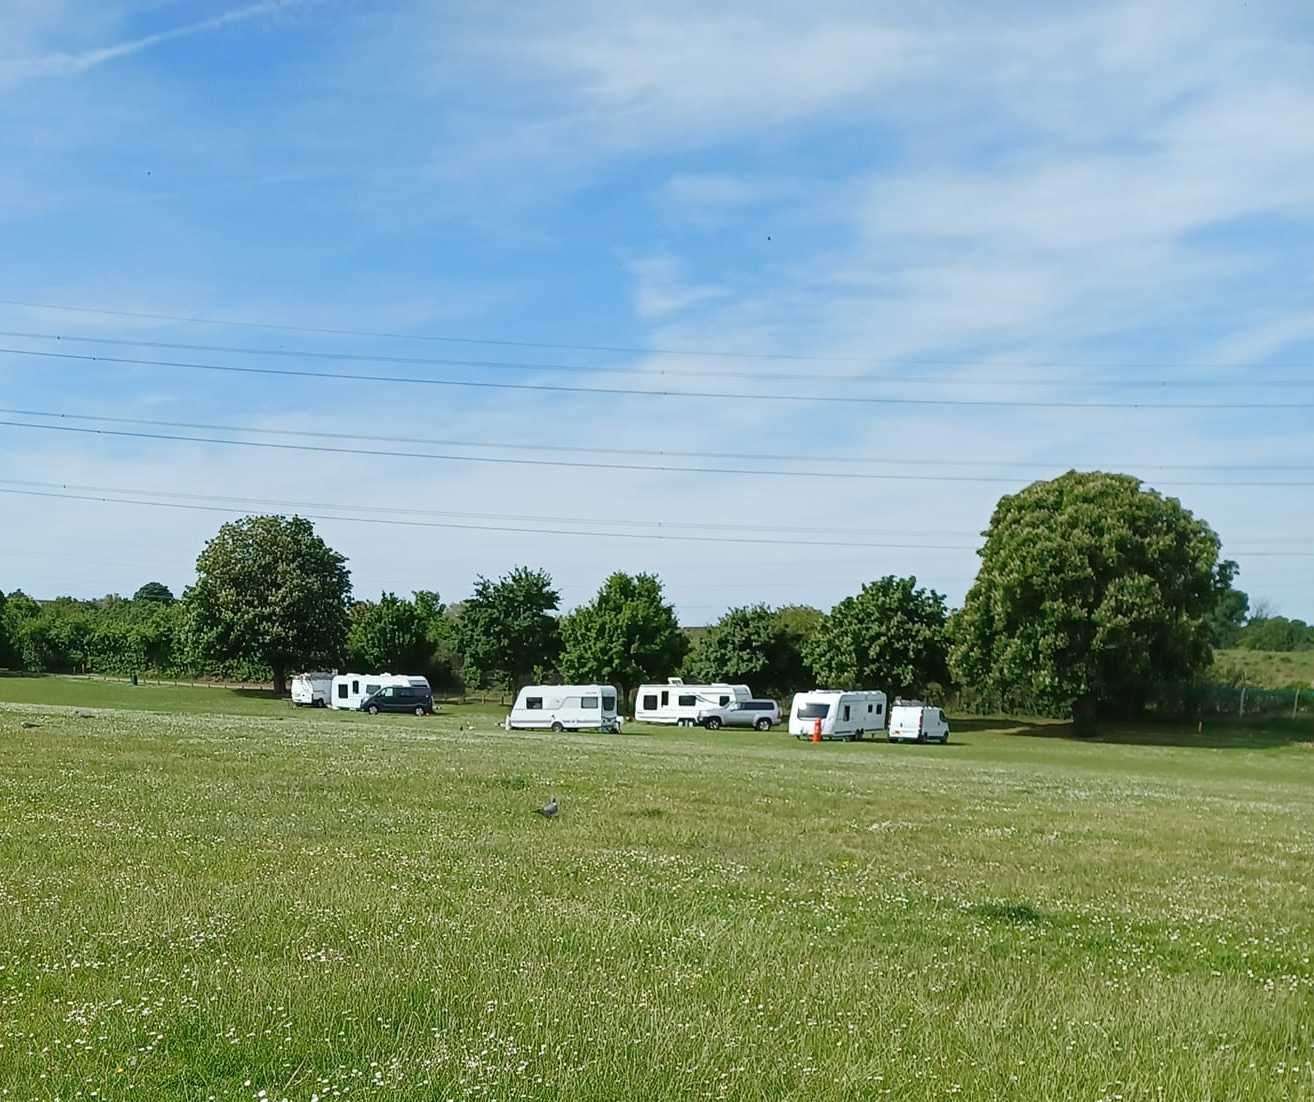 A traveller encampment has been spotted on Stone Recreation Ground just hours after one was ordered to move from Dartford Heath.